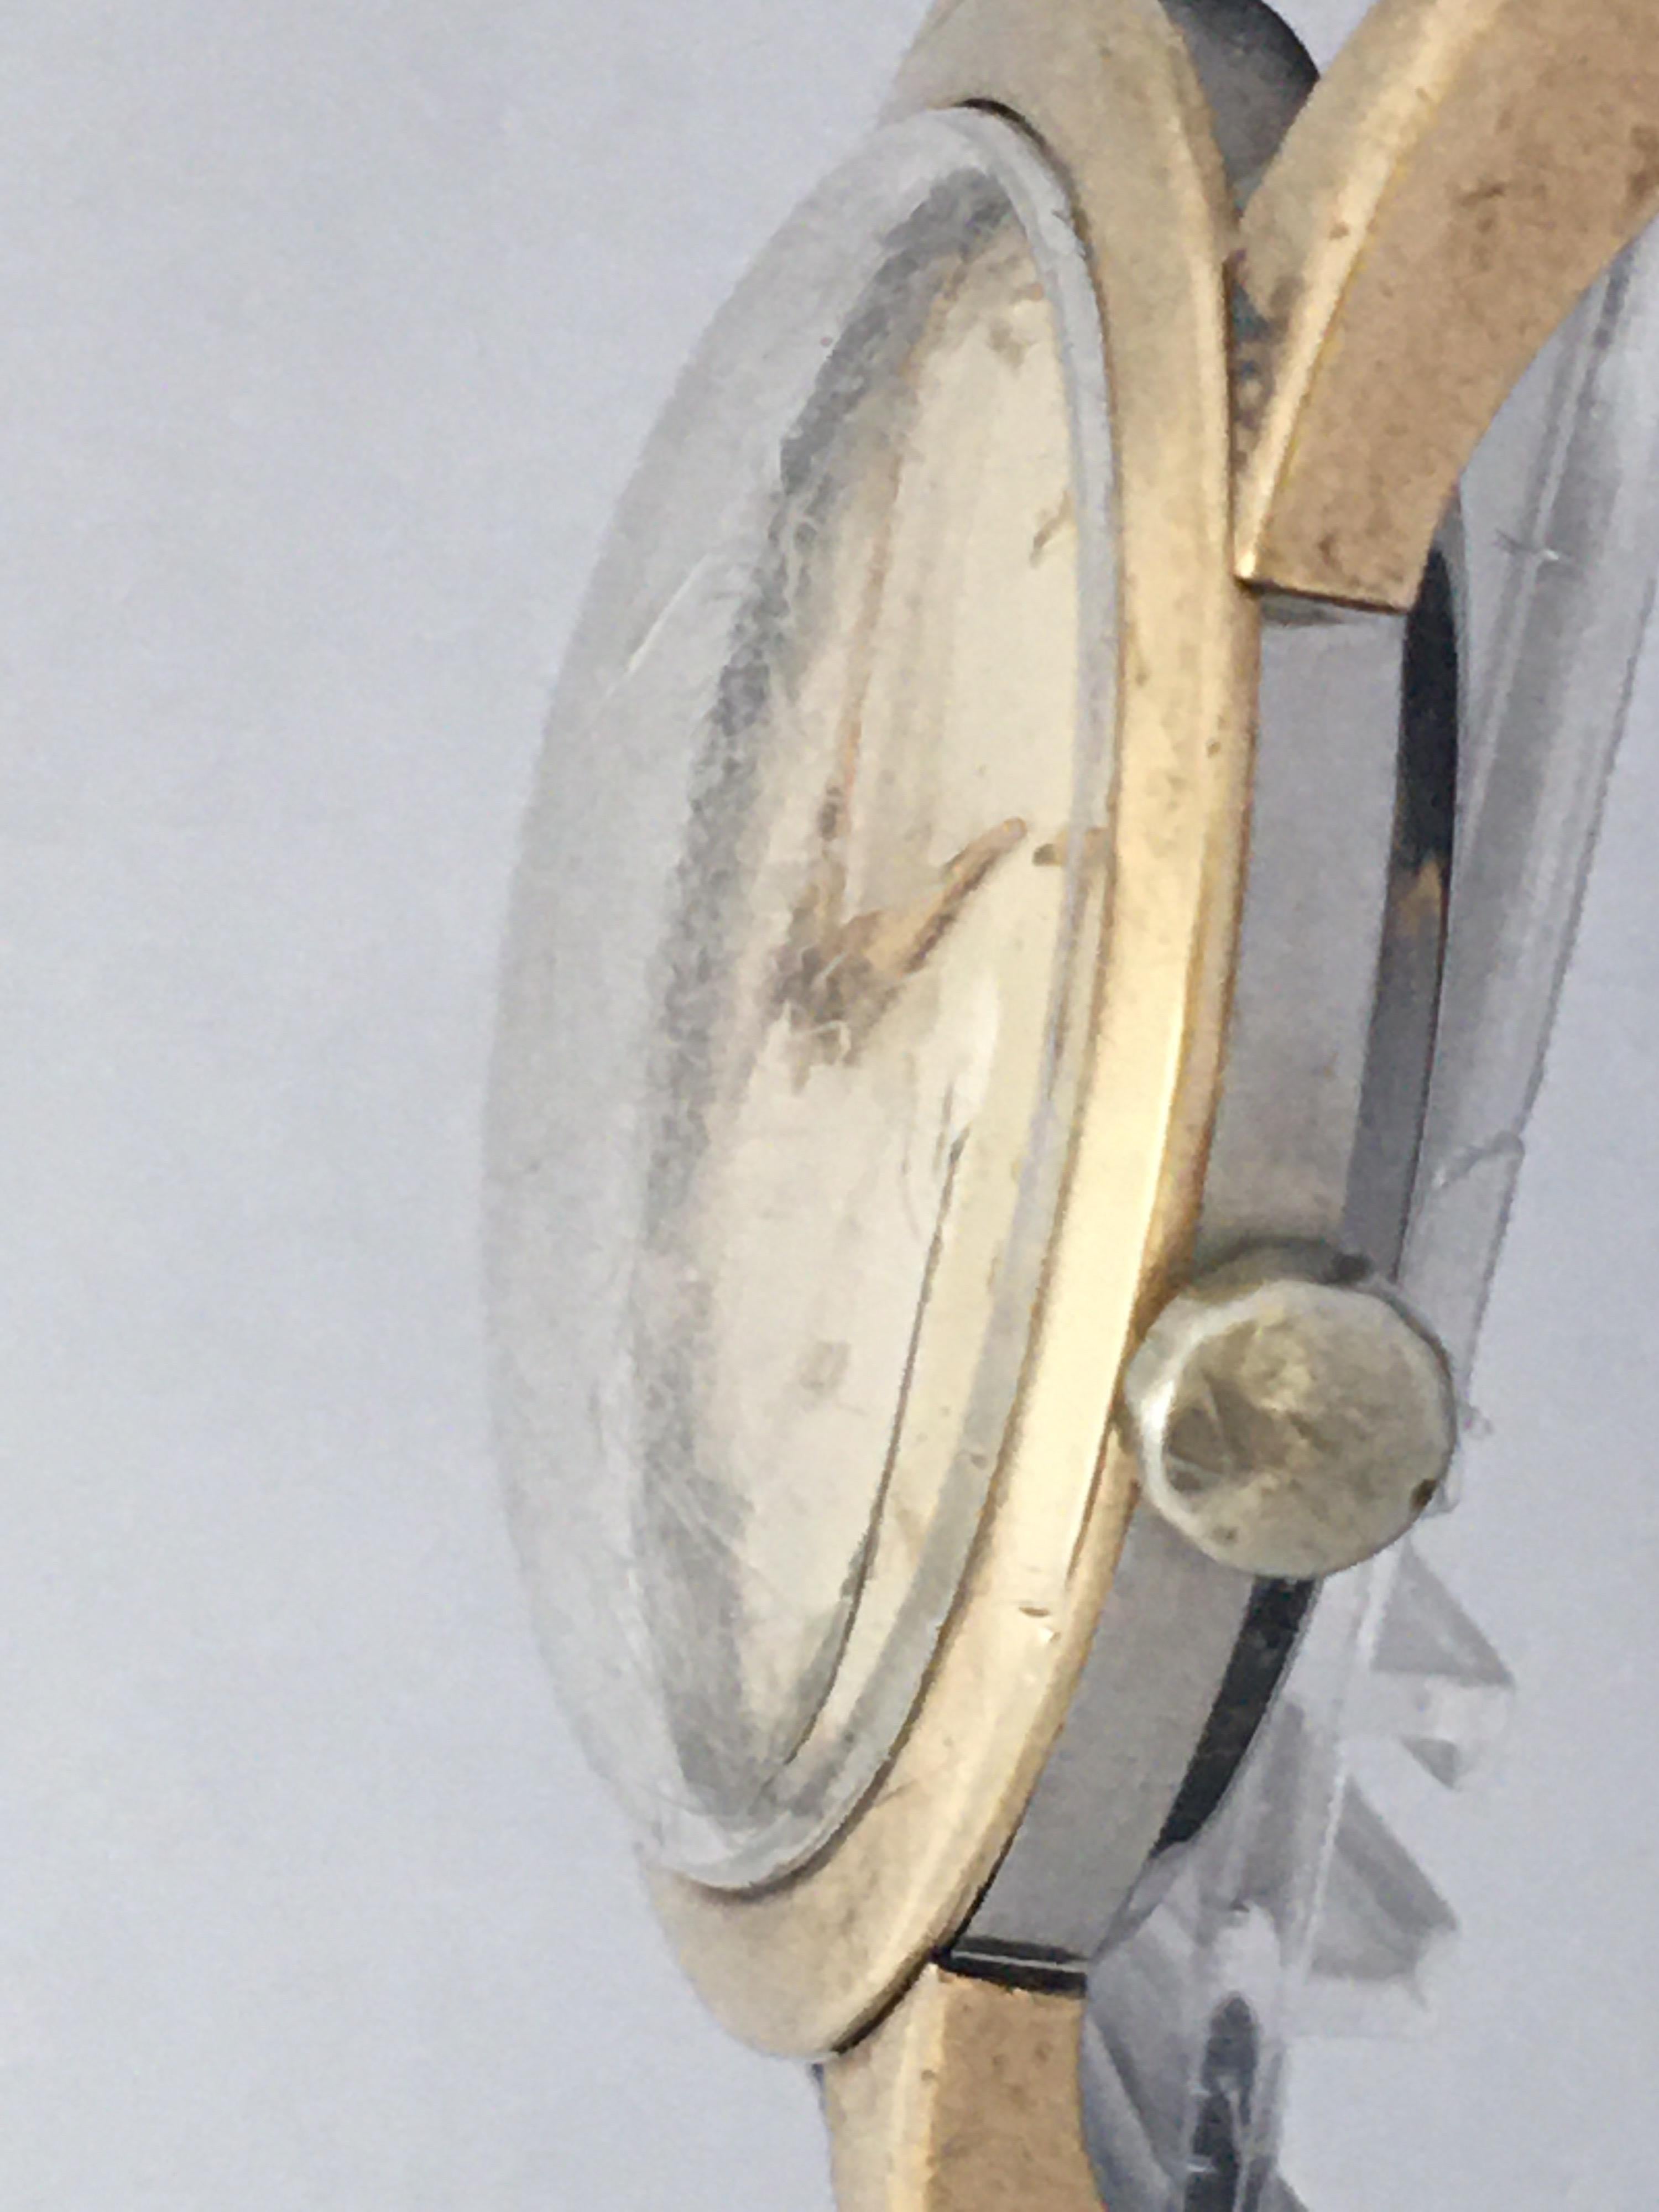 Vintage 1960s Gold Filled Cap and Stainless Steel Back Mechanical Watch In Fair Condition For Sale In Carlisle, GB